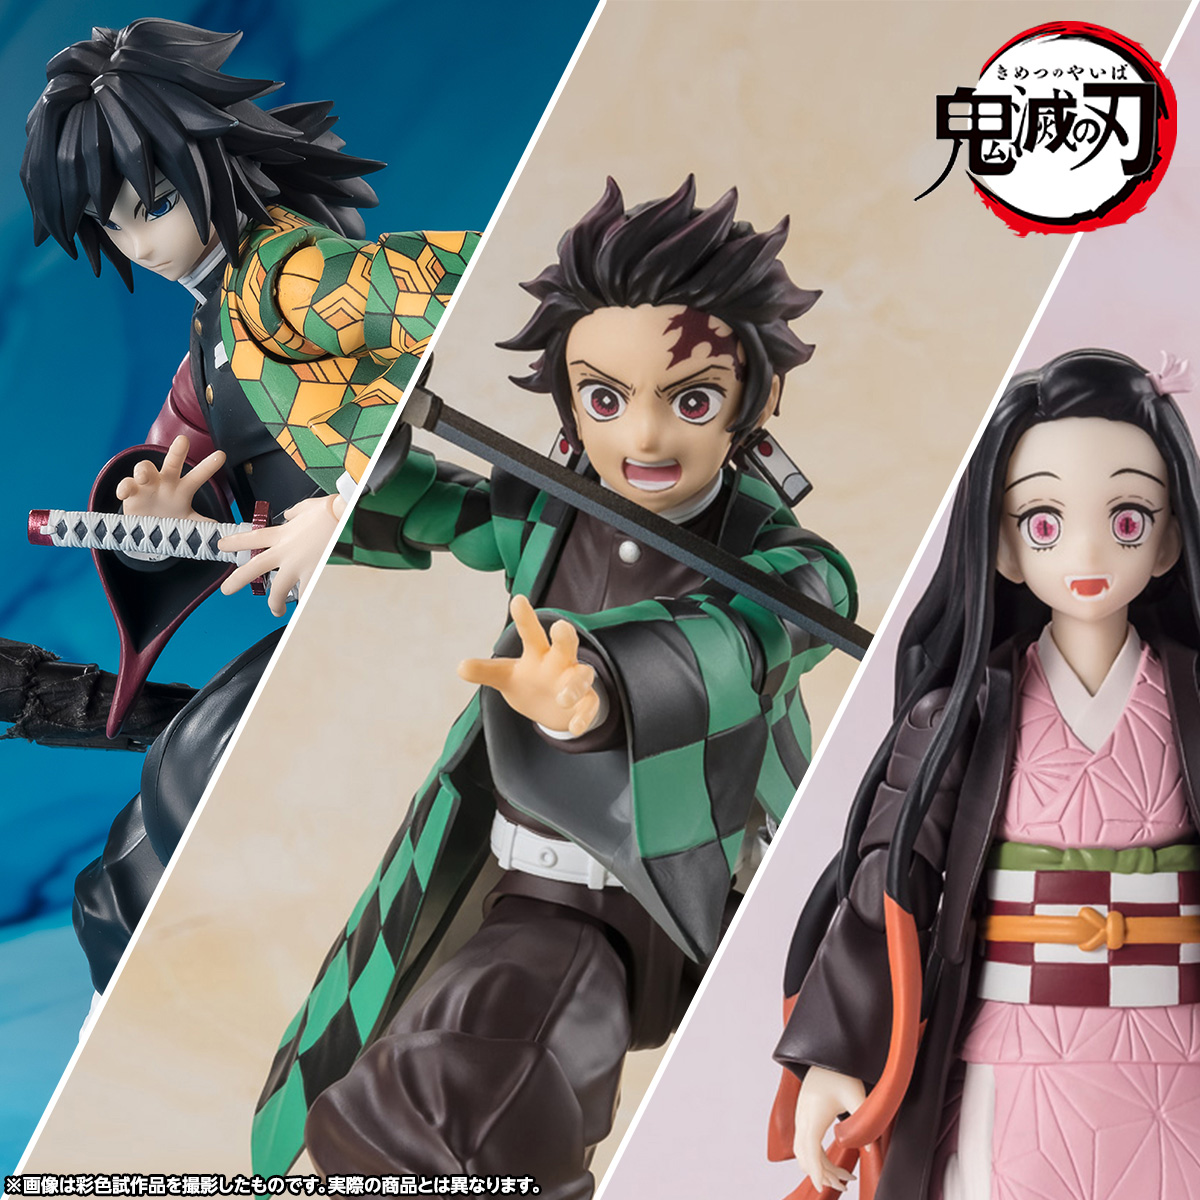 Demon Slayer Corps The new &quot;Water Pillar&quot; GIYU TOMIOKA is now available! S.H.Figuarts Introducing the &quot;Demon Slayer: Kimetsu no Yaiba&quot; series!